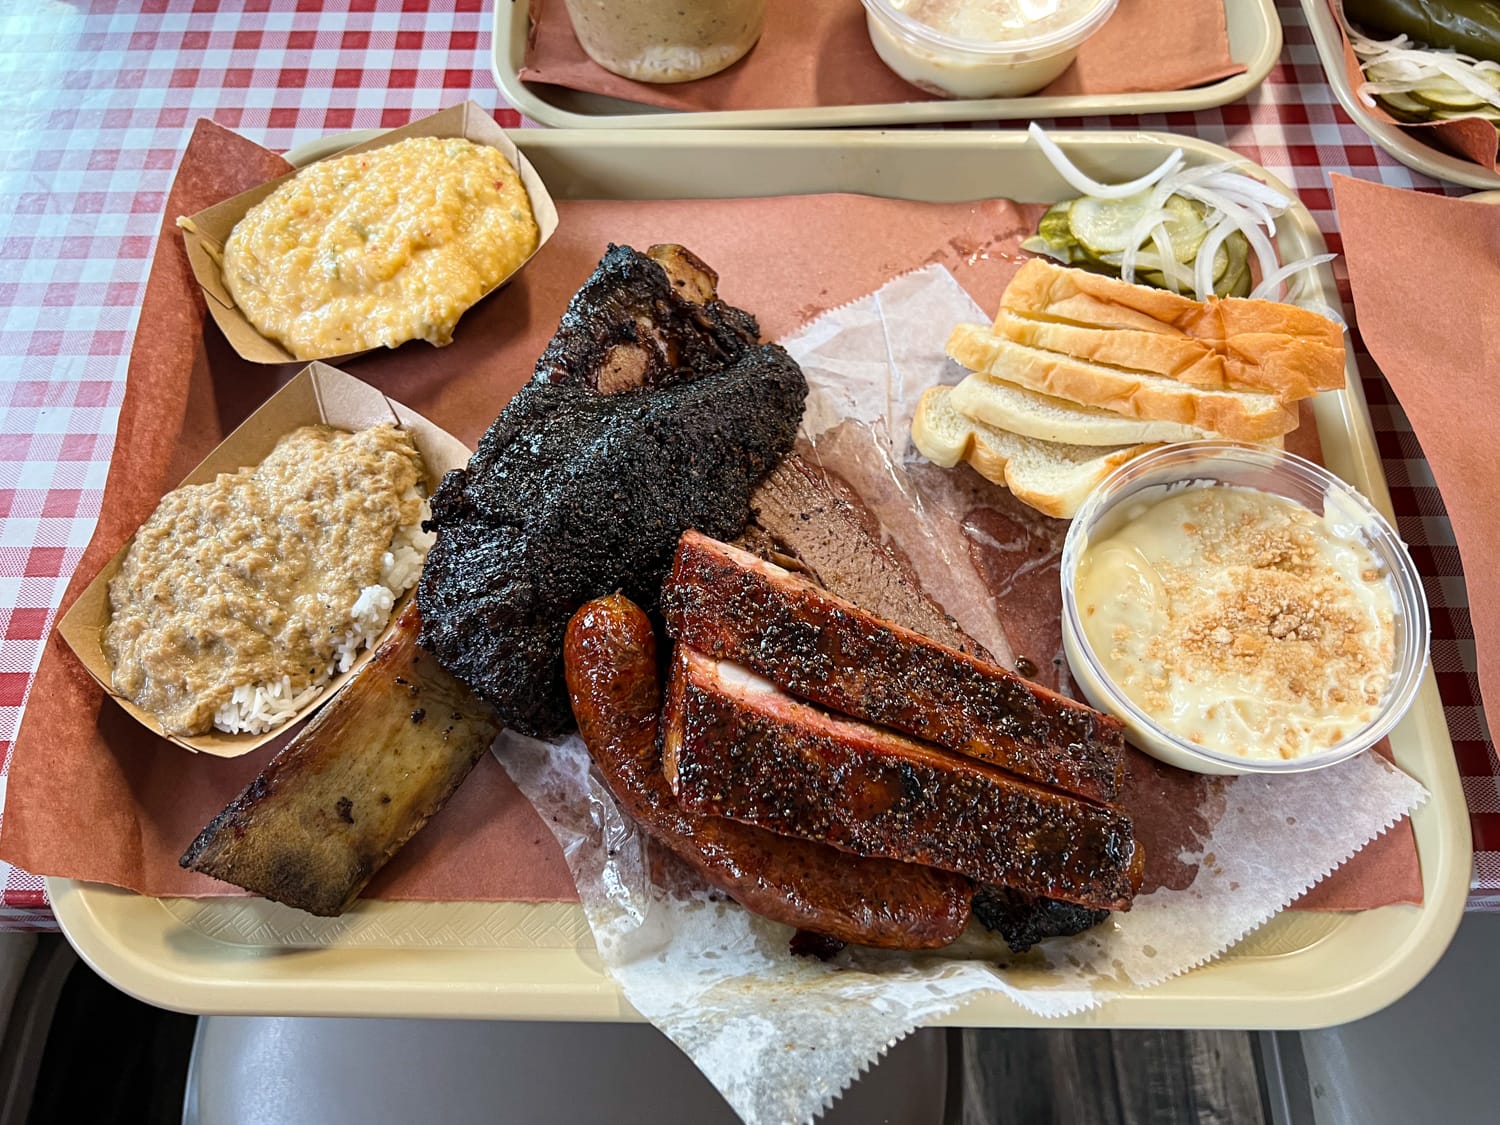 Beef rib, brisket, sausage and sides at Goldee's Barbecue 